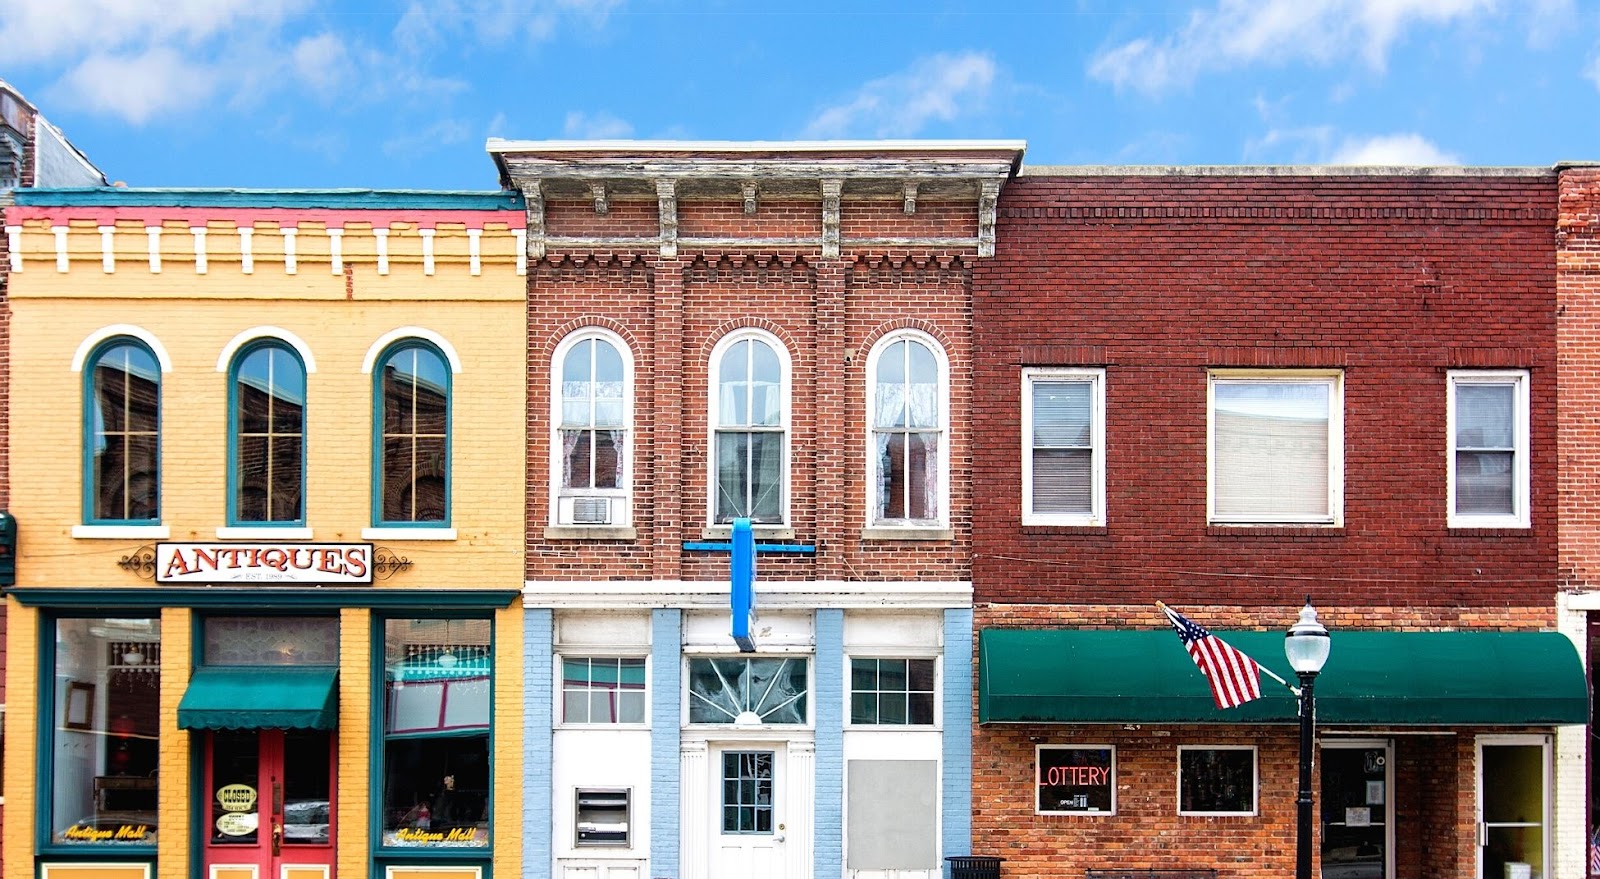 A photo of old brick storefronts in a small town